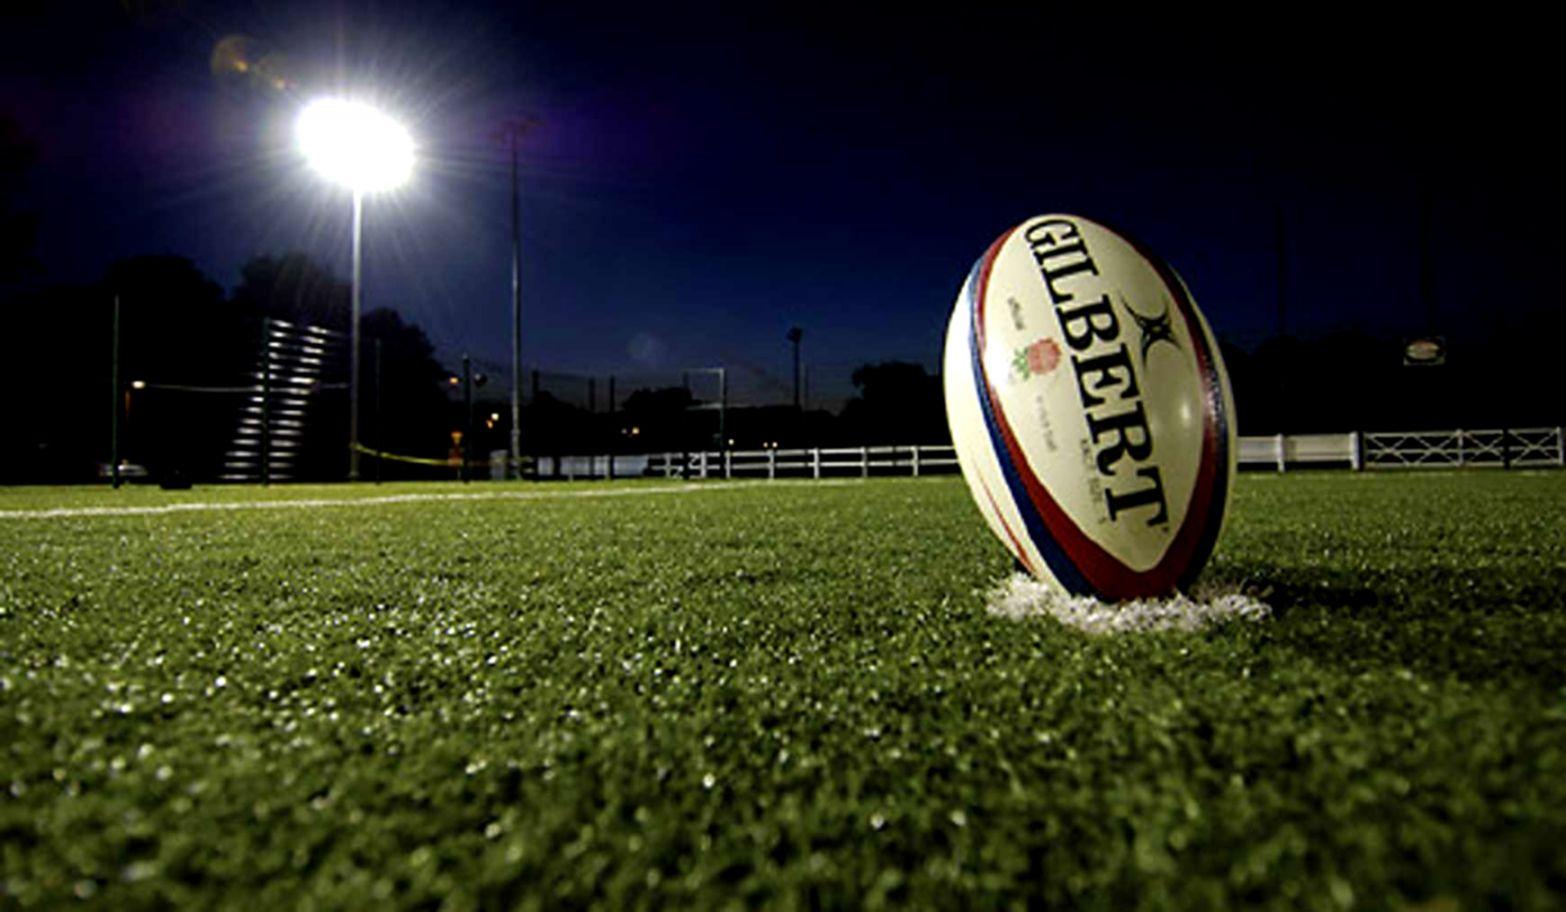 Rugby wallpapers and backgrounds